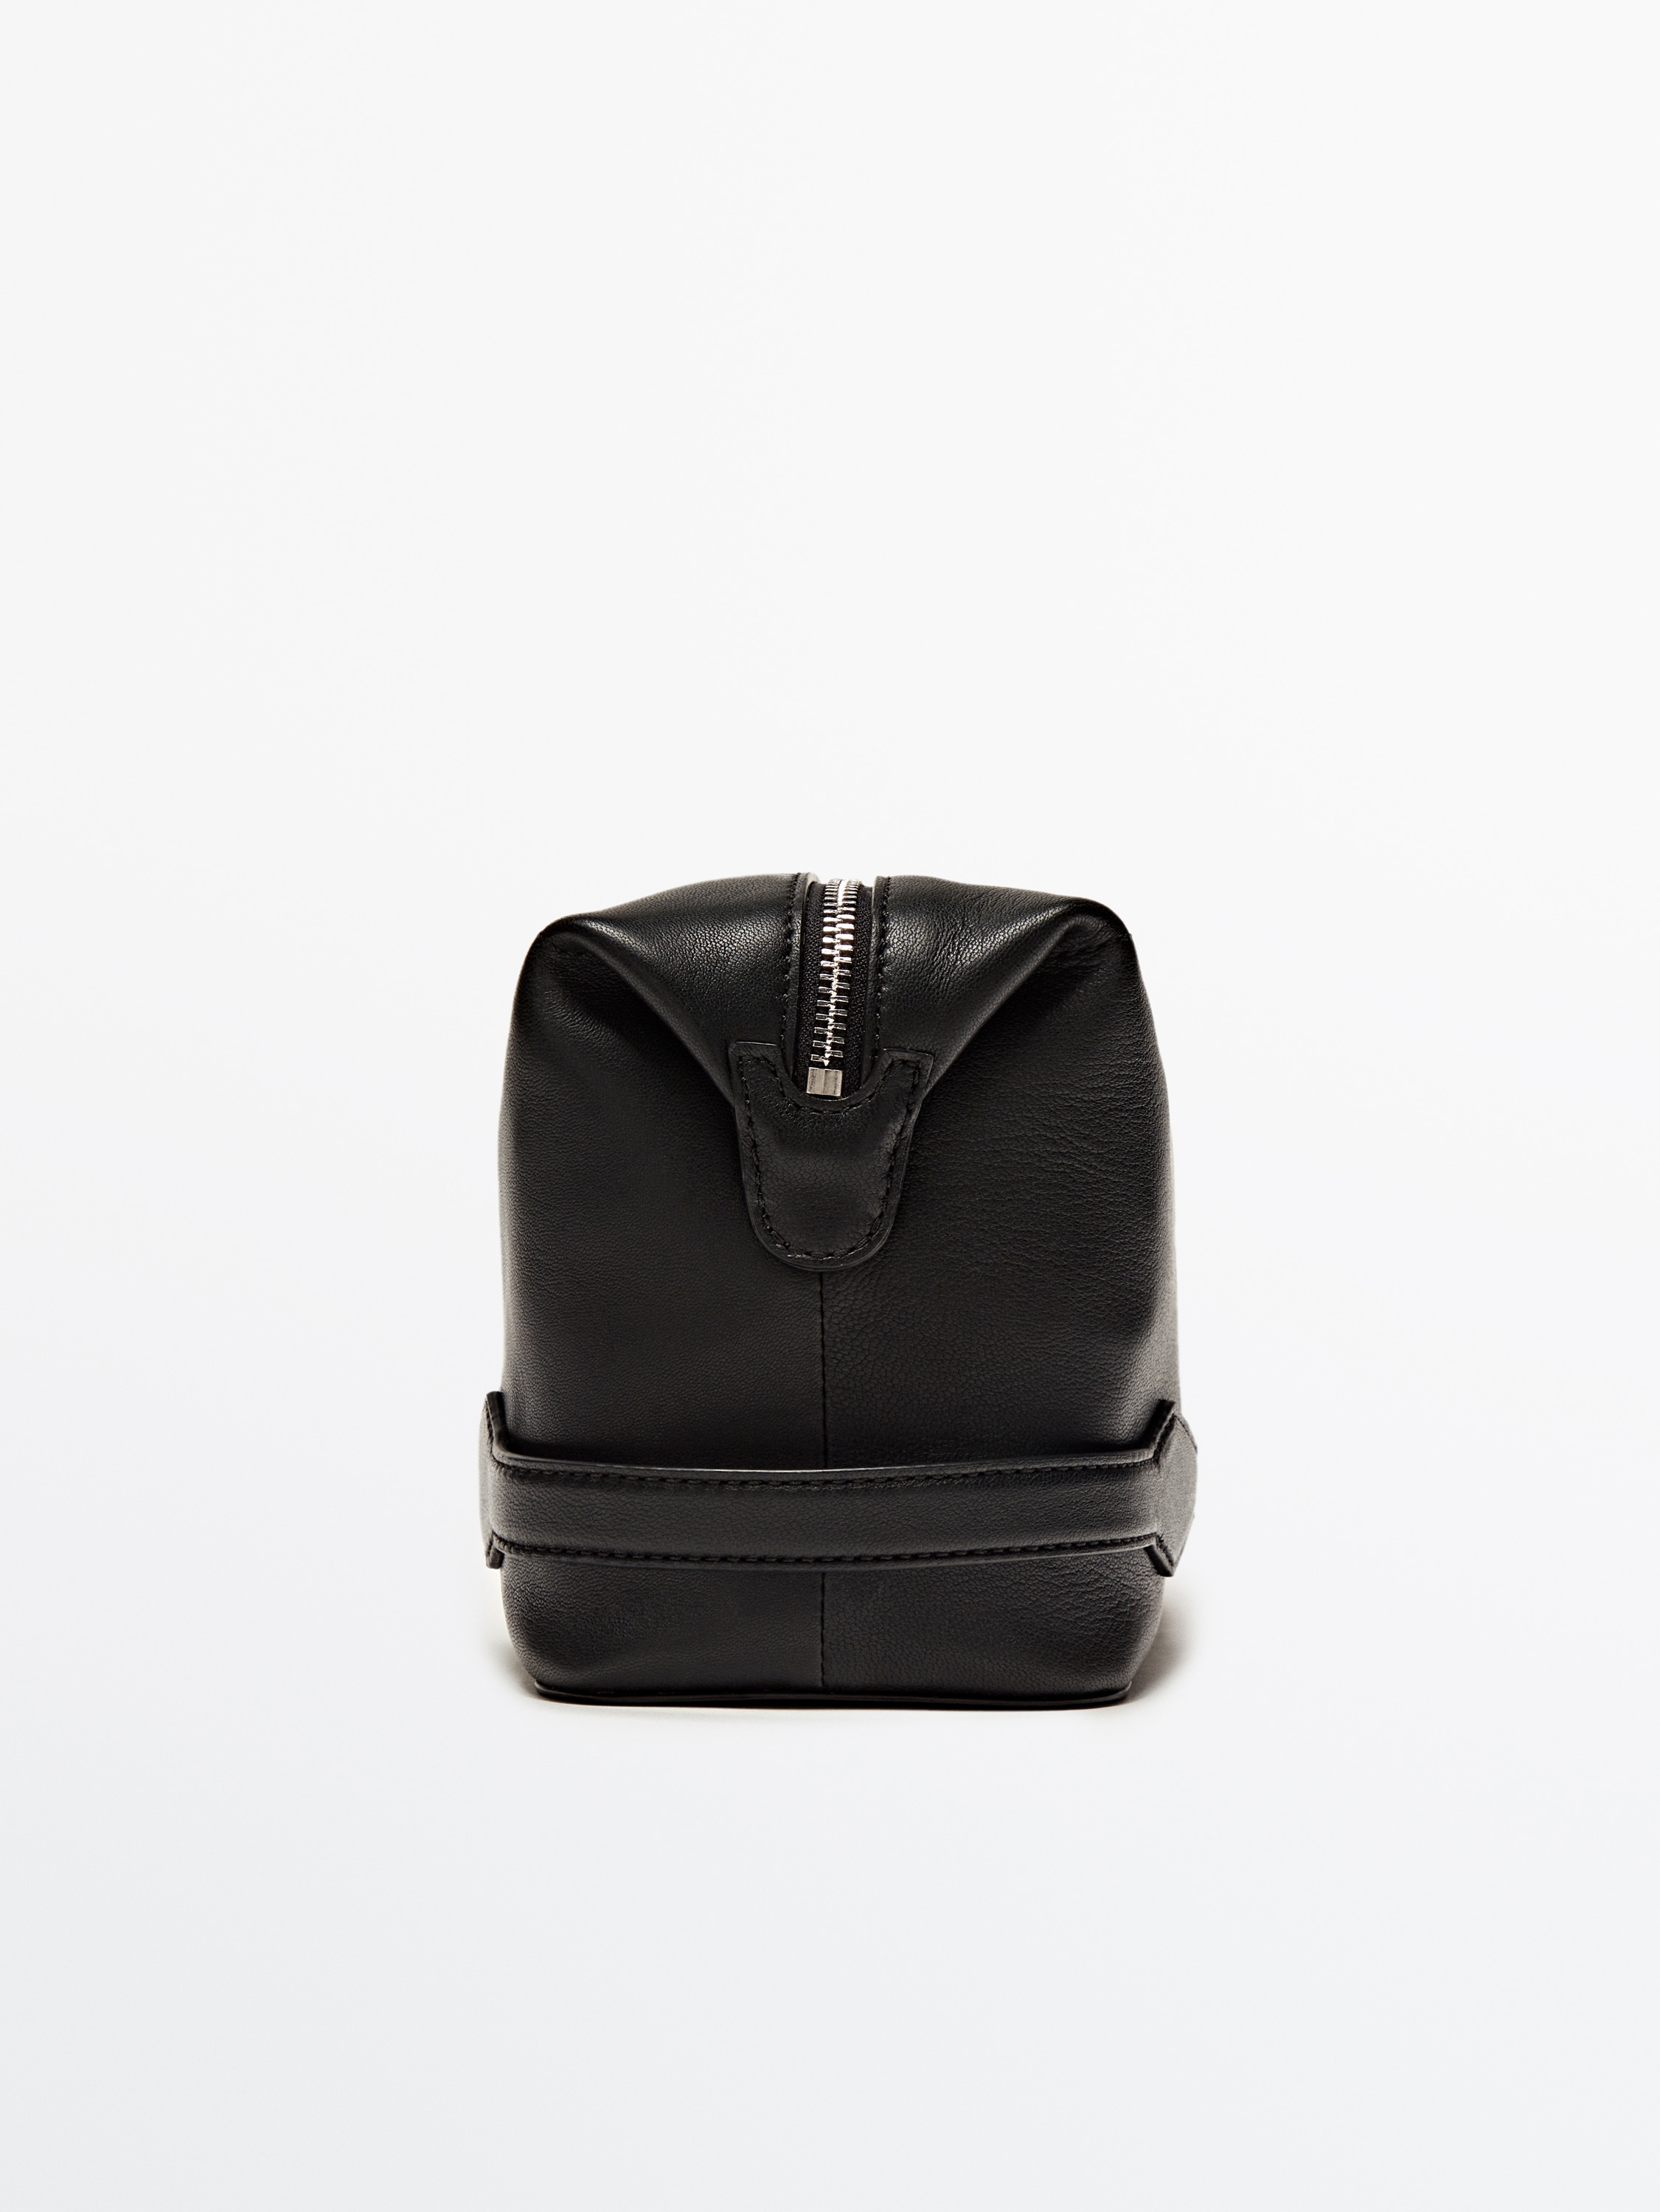 Nappa leather toiletry bag with zip